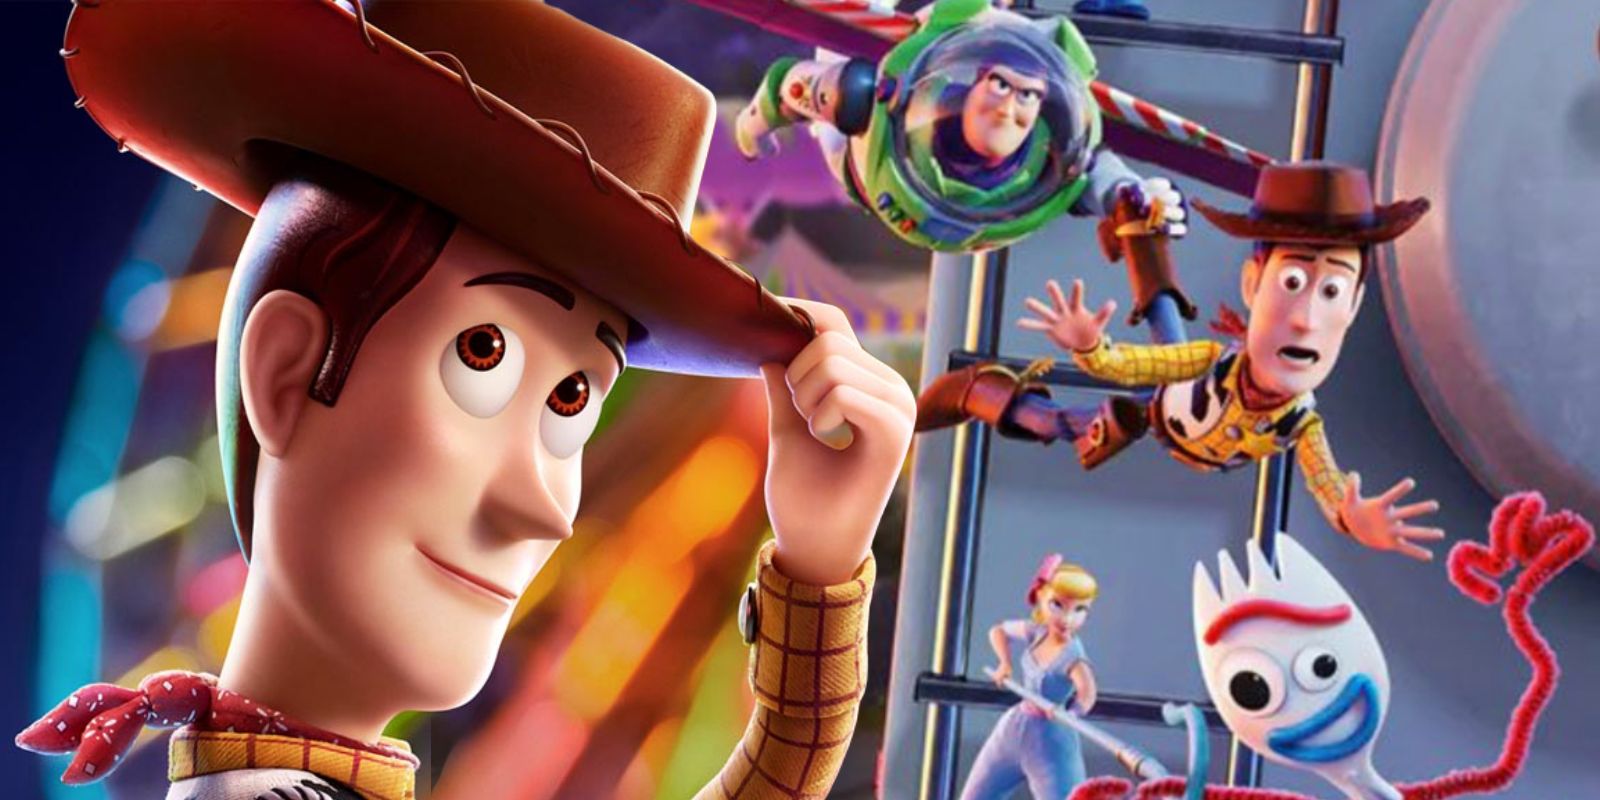 Woody next to Toy Story 4 poster featuring Buzz, Woody, Bo Peep, and Forky